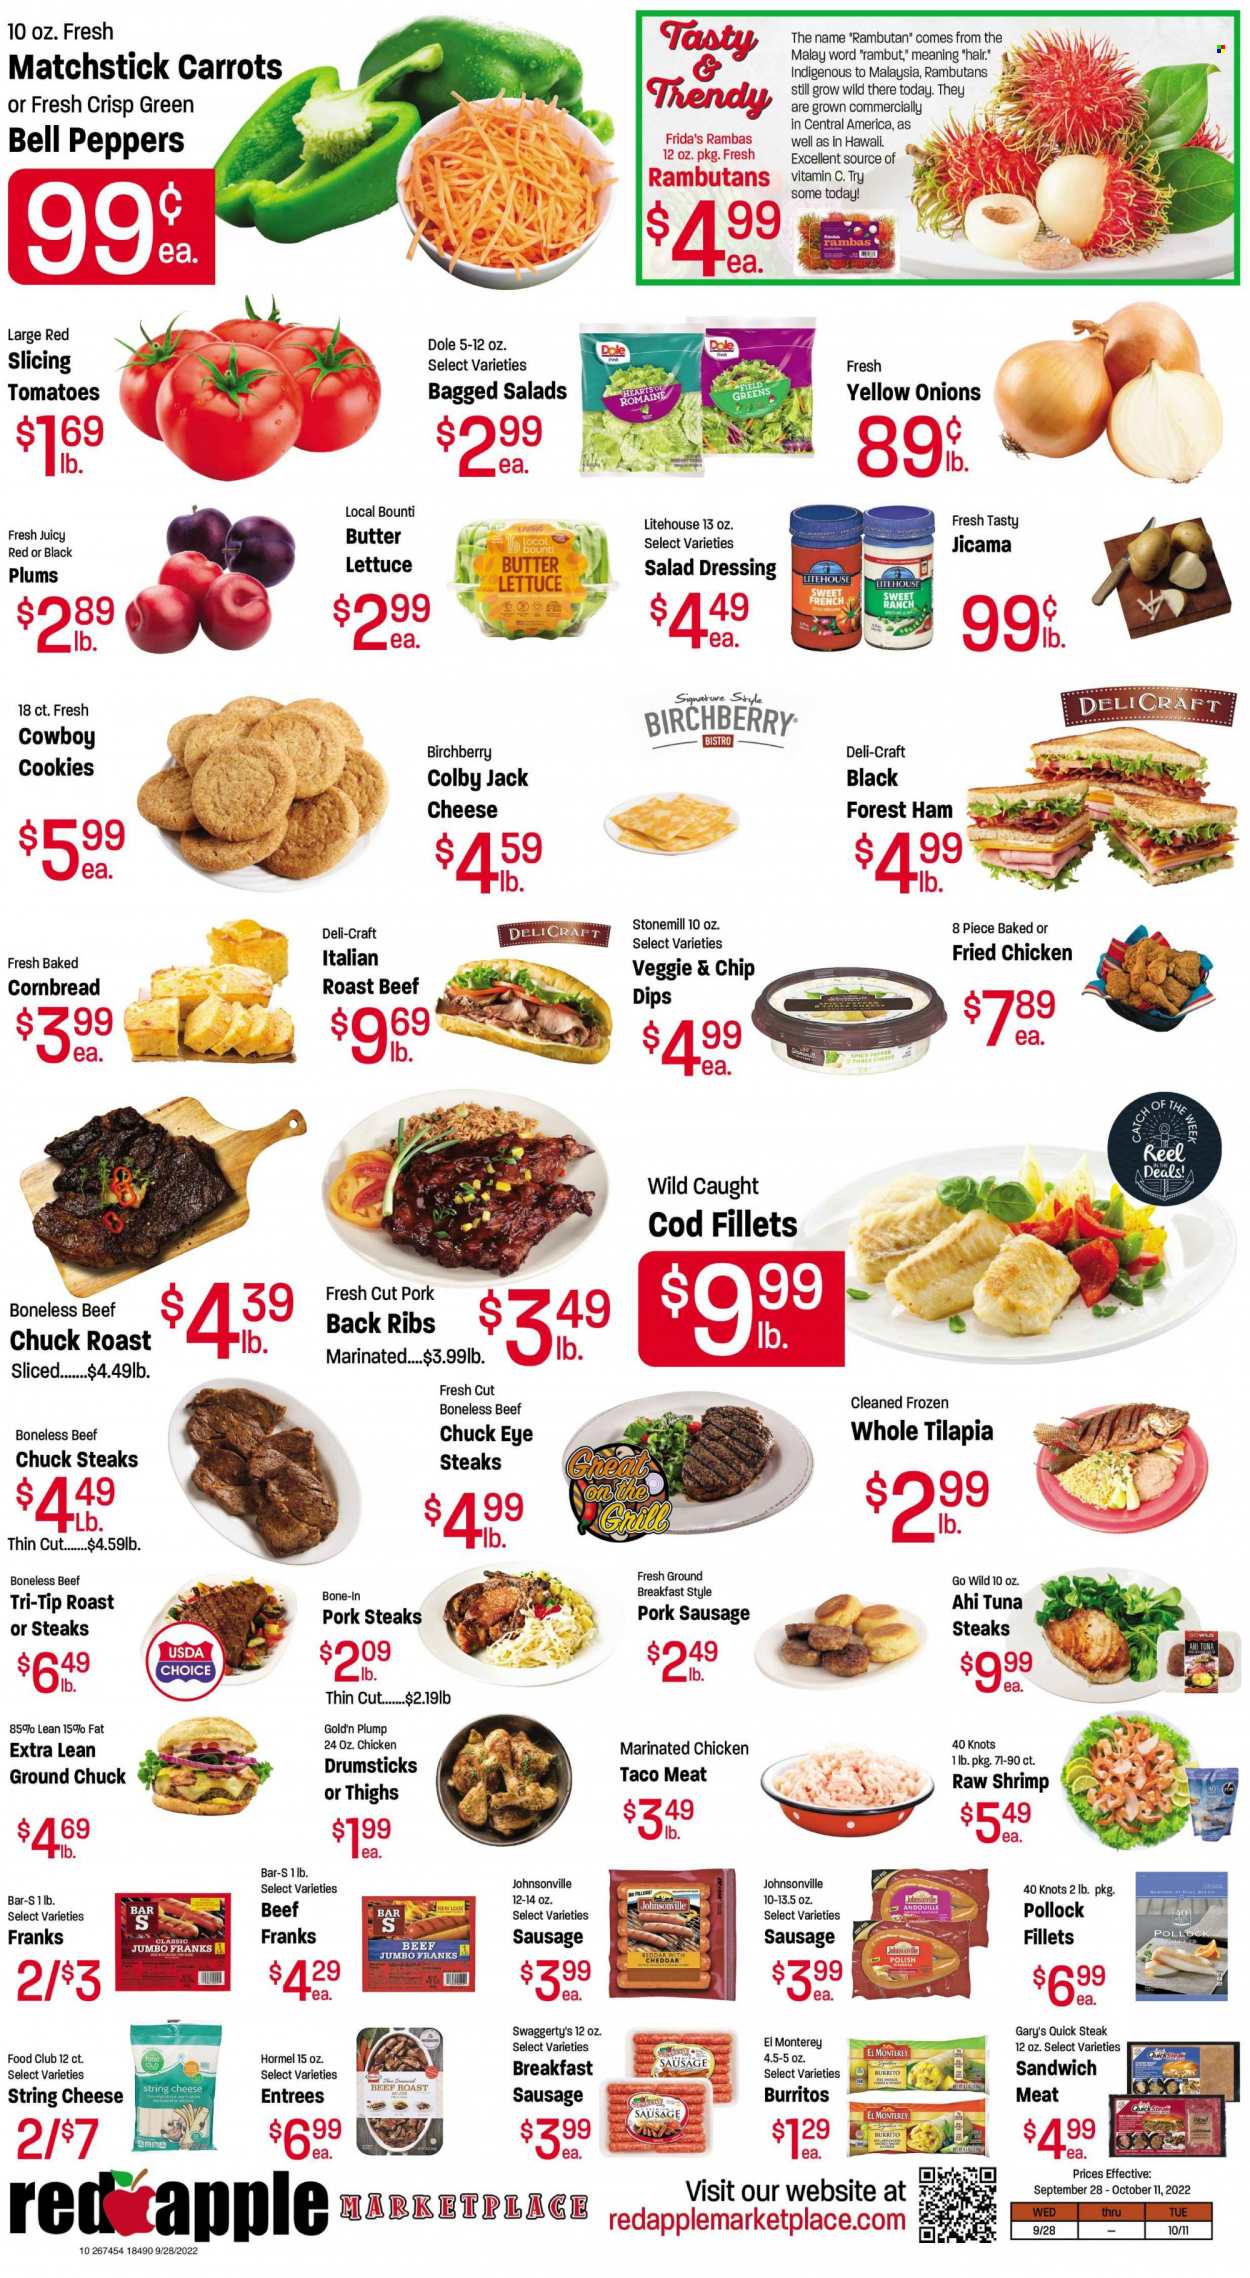 thumbnail - Red Apple Marketplace Flyer - 09/28/2022 - 10/11/2022 - Sales products - corn bread, bell peppers, butter lettuce, carrots, tomatoes, onion, lettuce, Dole, peppers, plums, cod, tilapia, tuna, pollock, seafood, shrimps, fried chicken, burrito, Hormel, ham, Johnsonville, sausage, pork sausage, Colby cheese, string cheese, ranch dressing, cookies, salad dressing, dressing, chicken drumsticks, marinated chicken, beef meat, ground chuck, steak, roast beef, chuck roast, pork chops, pork meat, pork ribs, pork back ribs, jicama, black plums. Page 2.